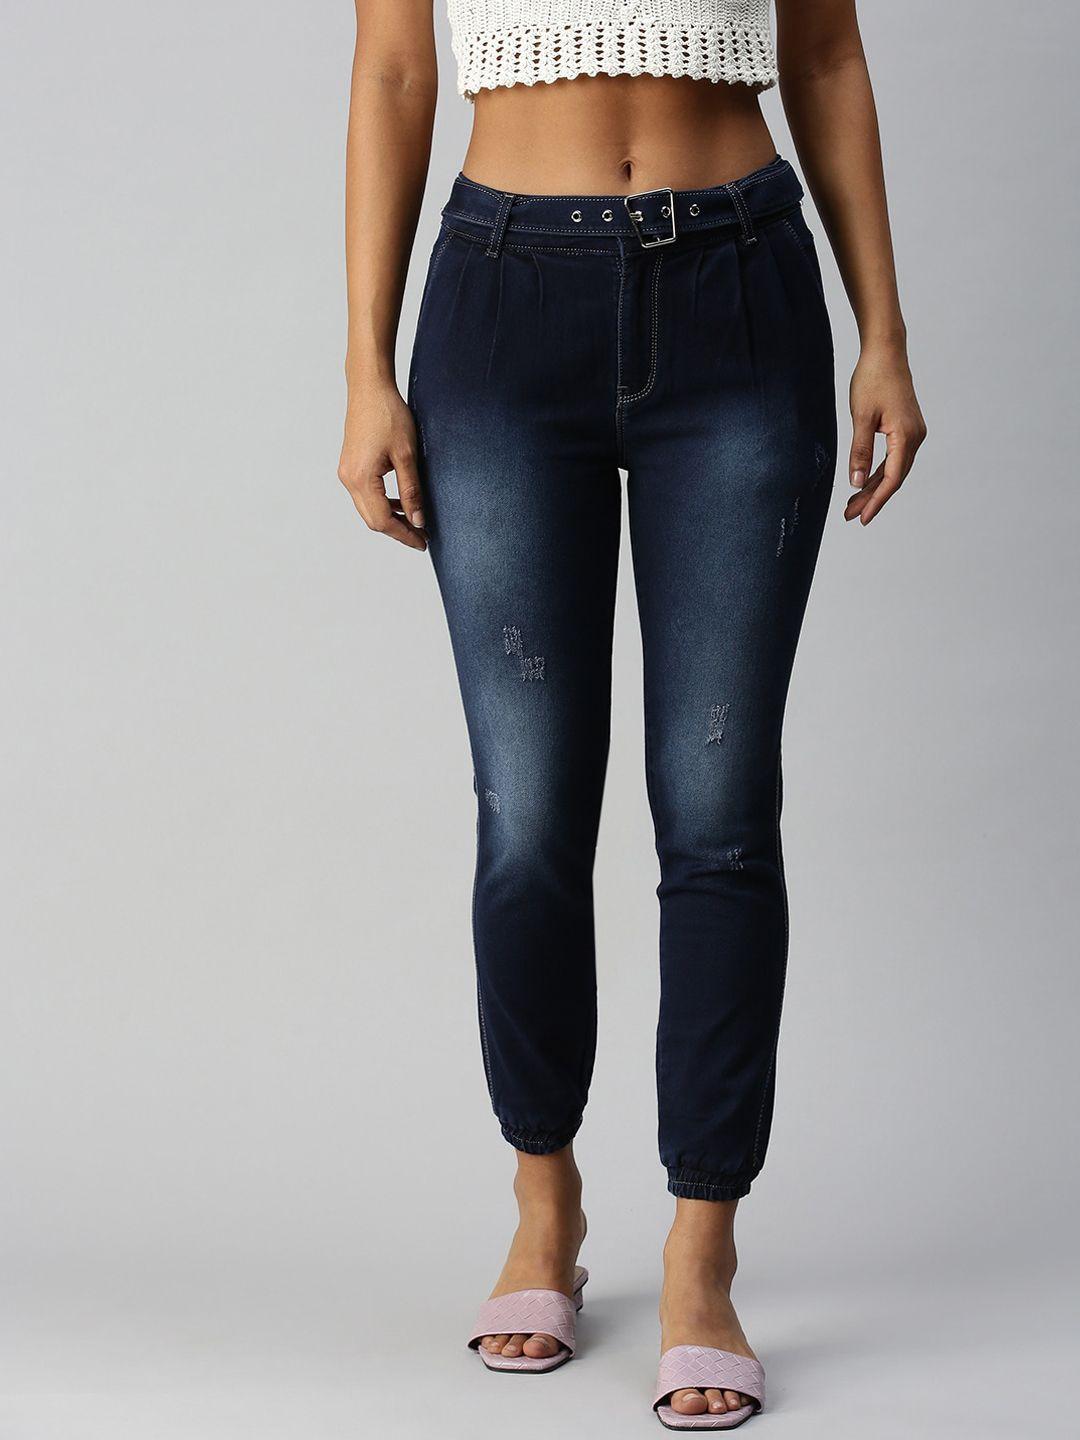 showoff-women-navy-blue-jogger-high-rise-low-distress-heavy-fade-stretchable-jeans